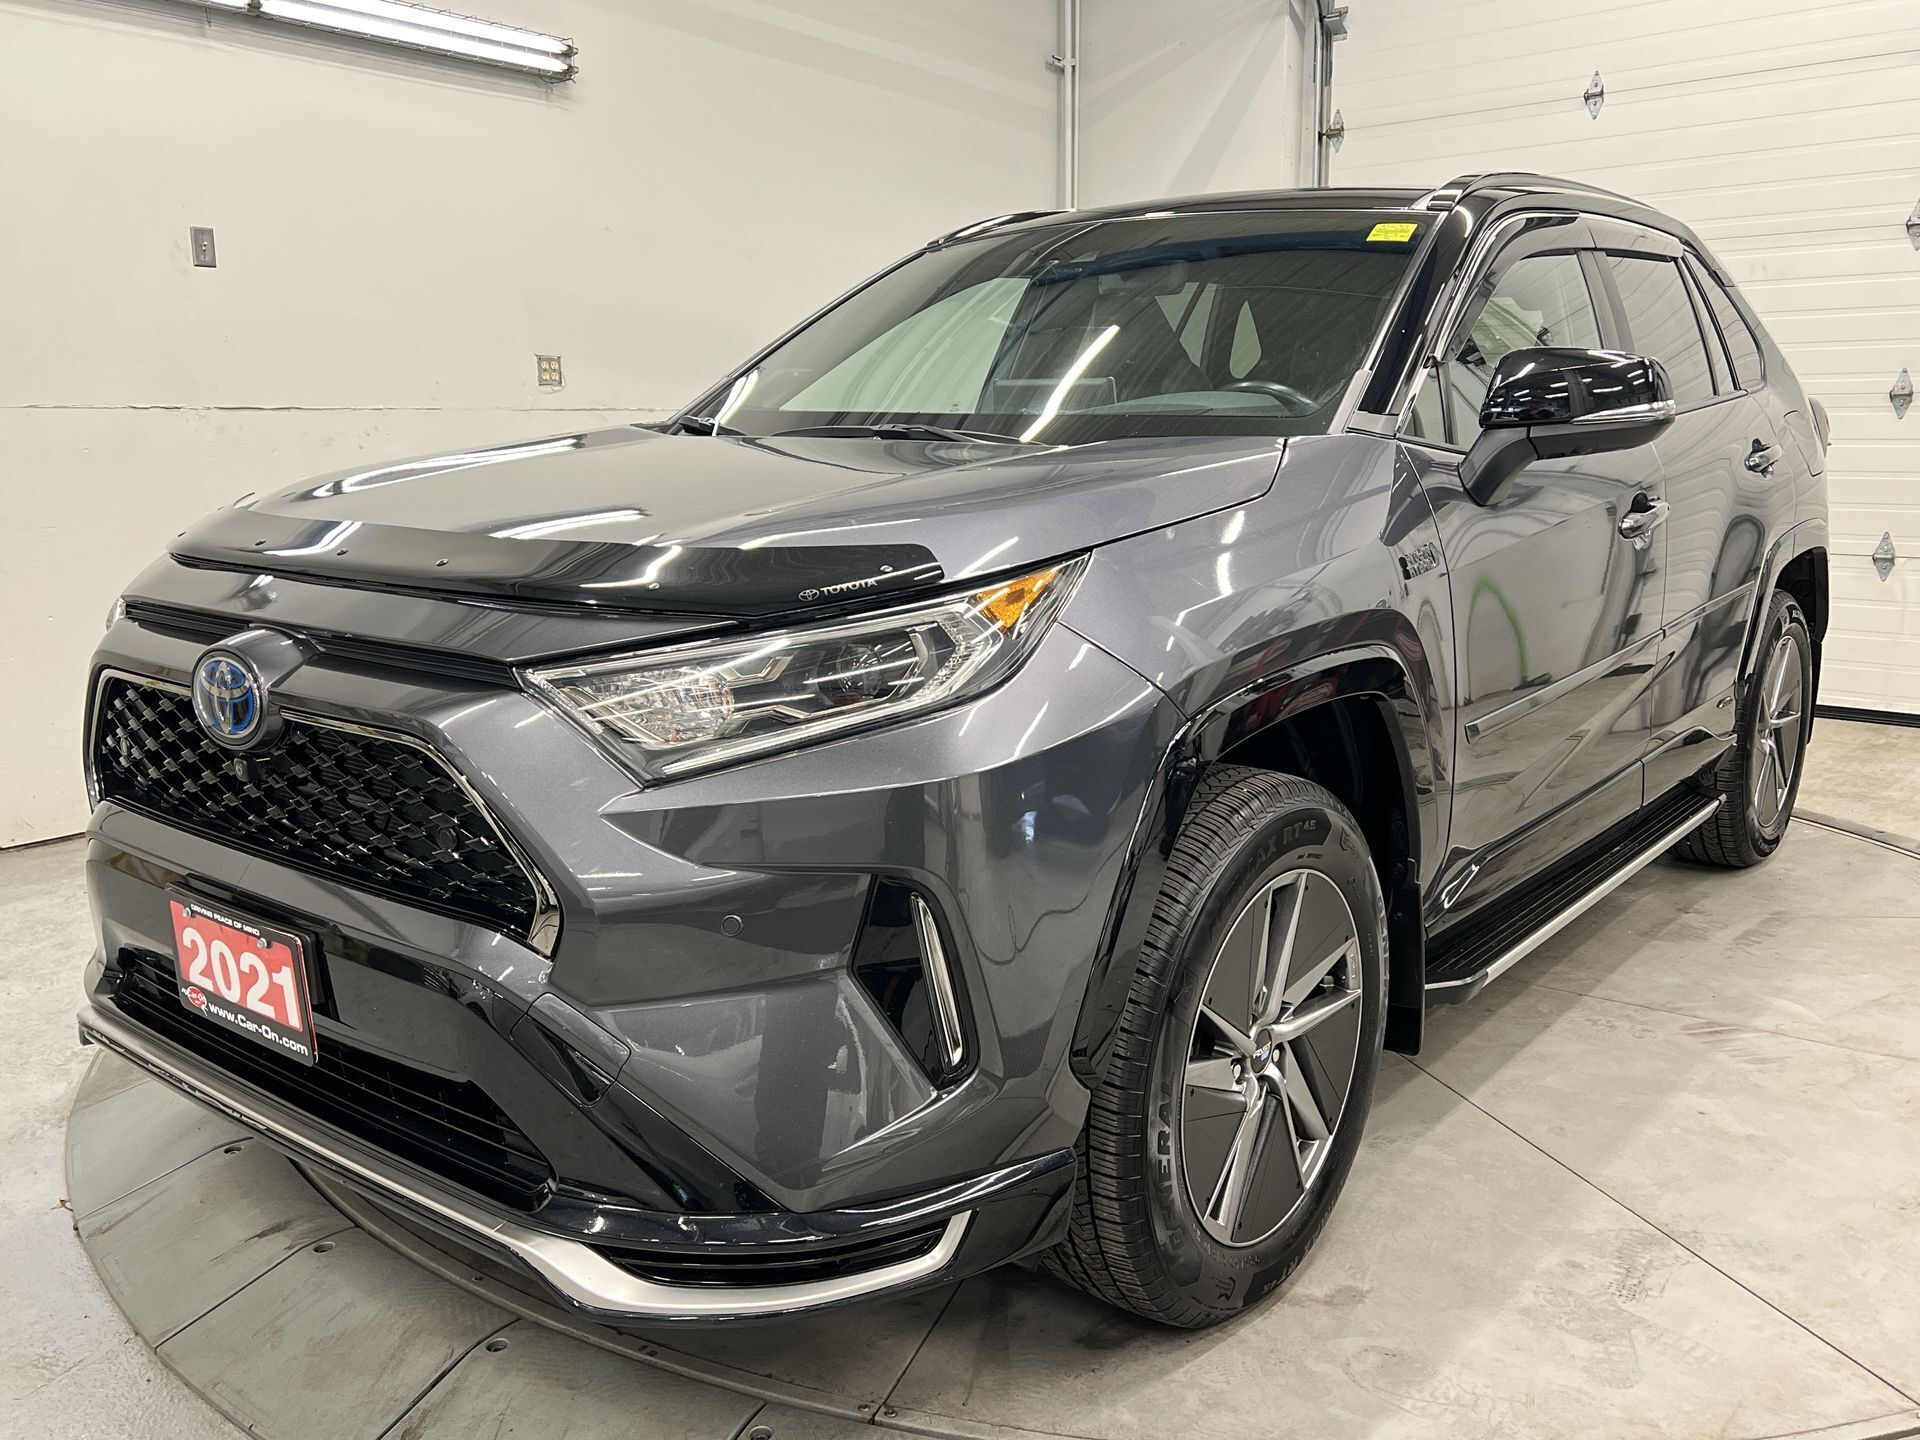 2021 Toyota RAV4 Prime Plug-In Hybrid XSE TECH AWD | PANO ROOF | LEATHER